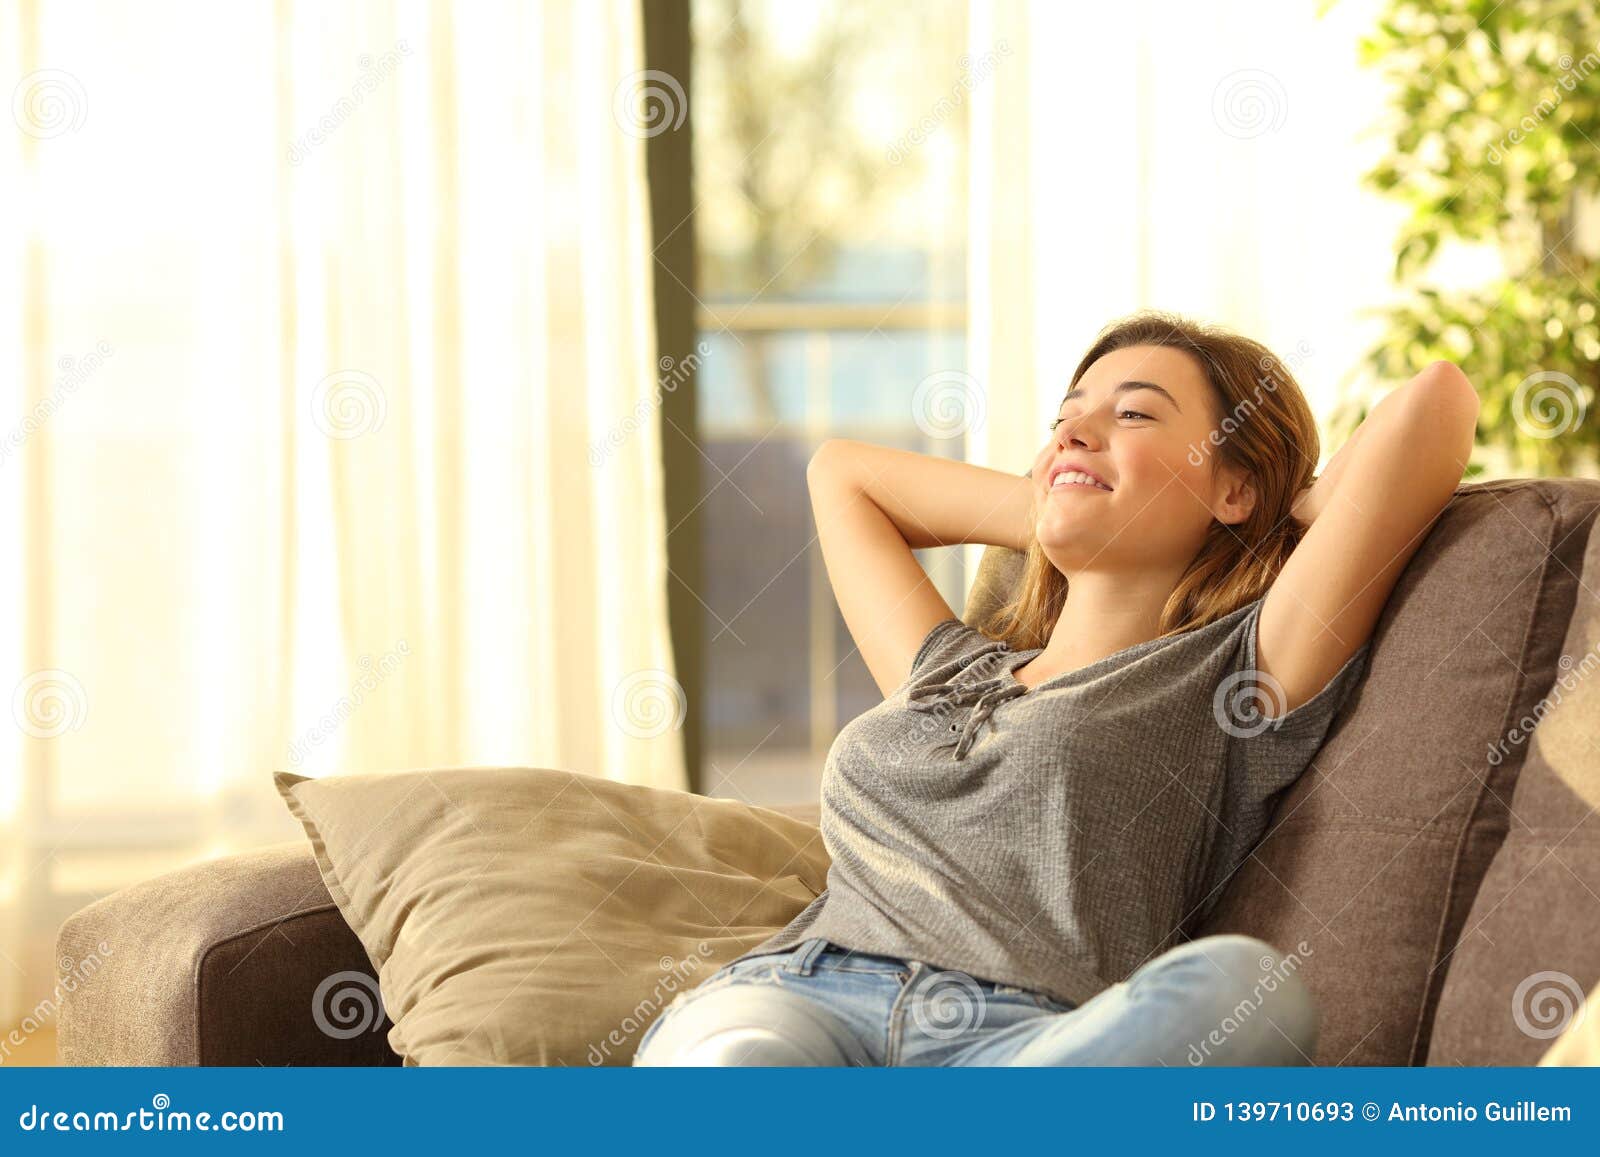 happy woman resting comfortably at home